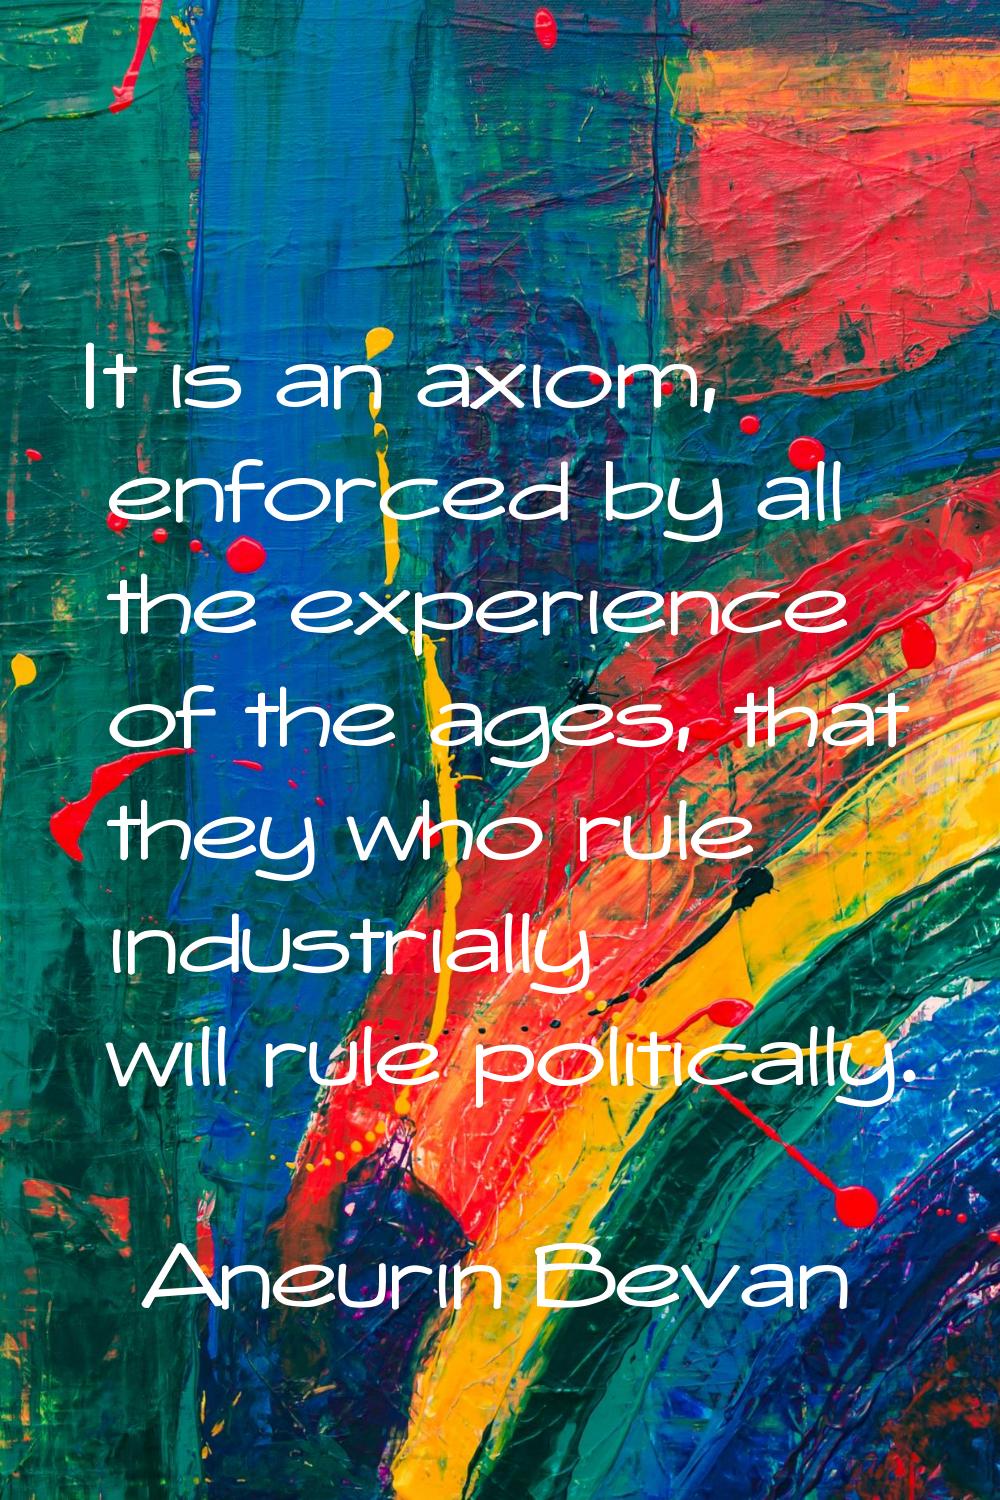 It is an axiom, enforced by all the experience of the ages, that they who rule industrially will ru